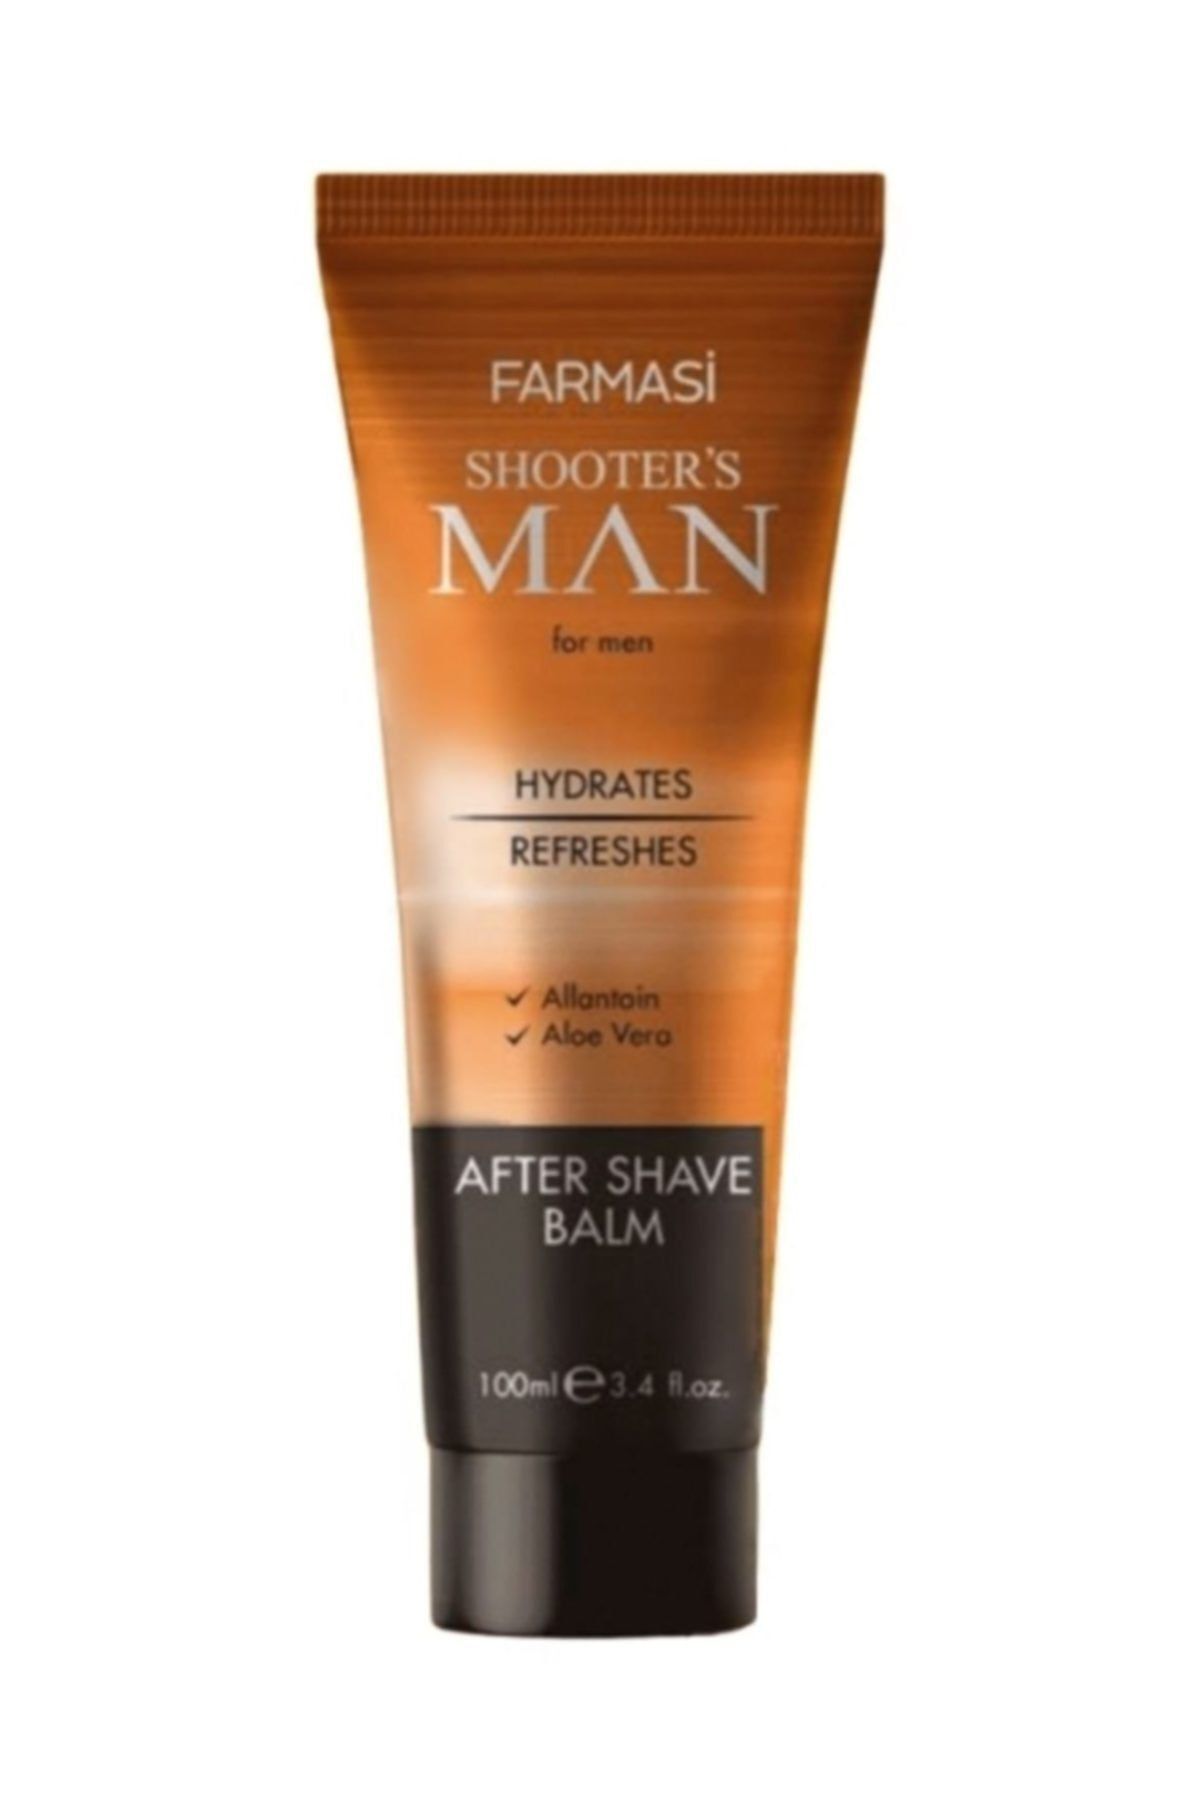 Farmasi Shooters Man After Shave Balm Balsam 100 ml